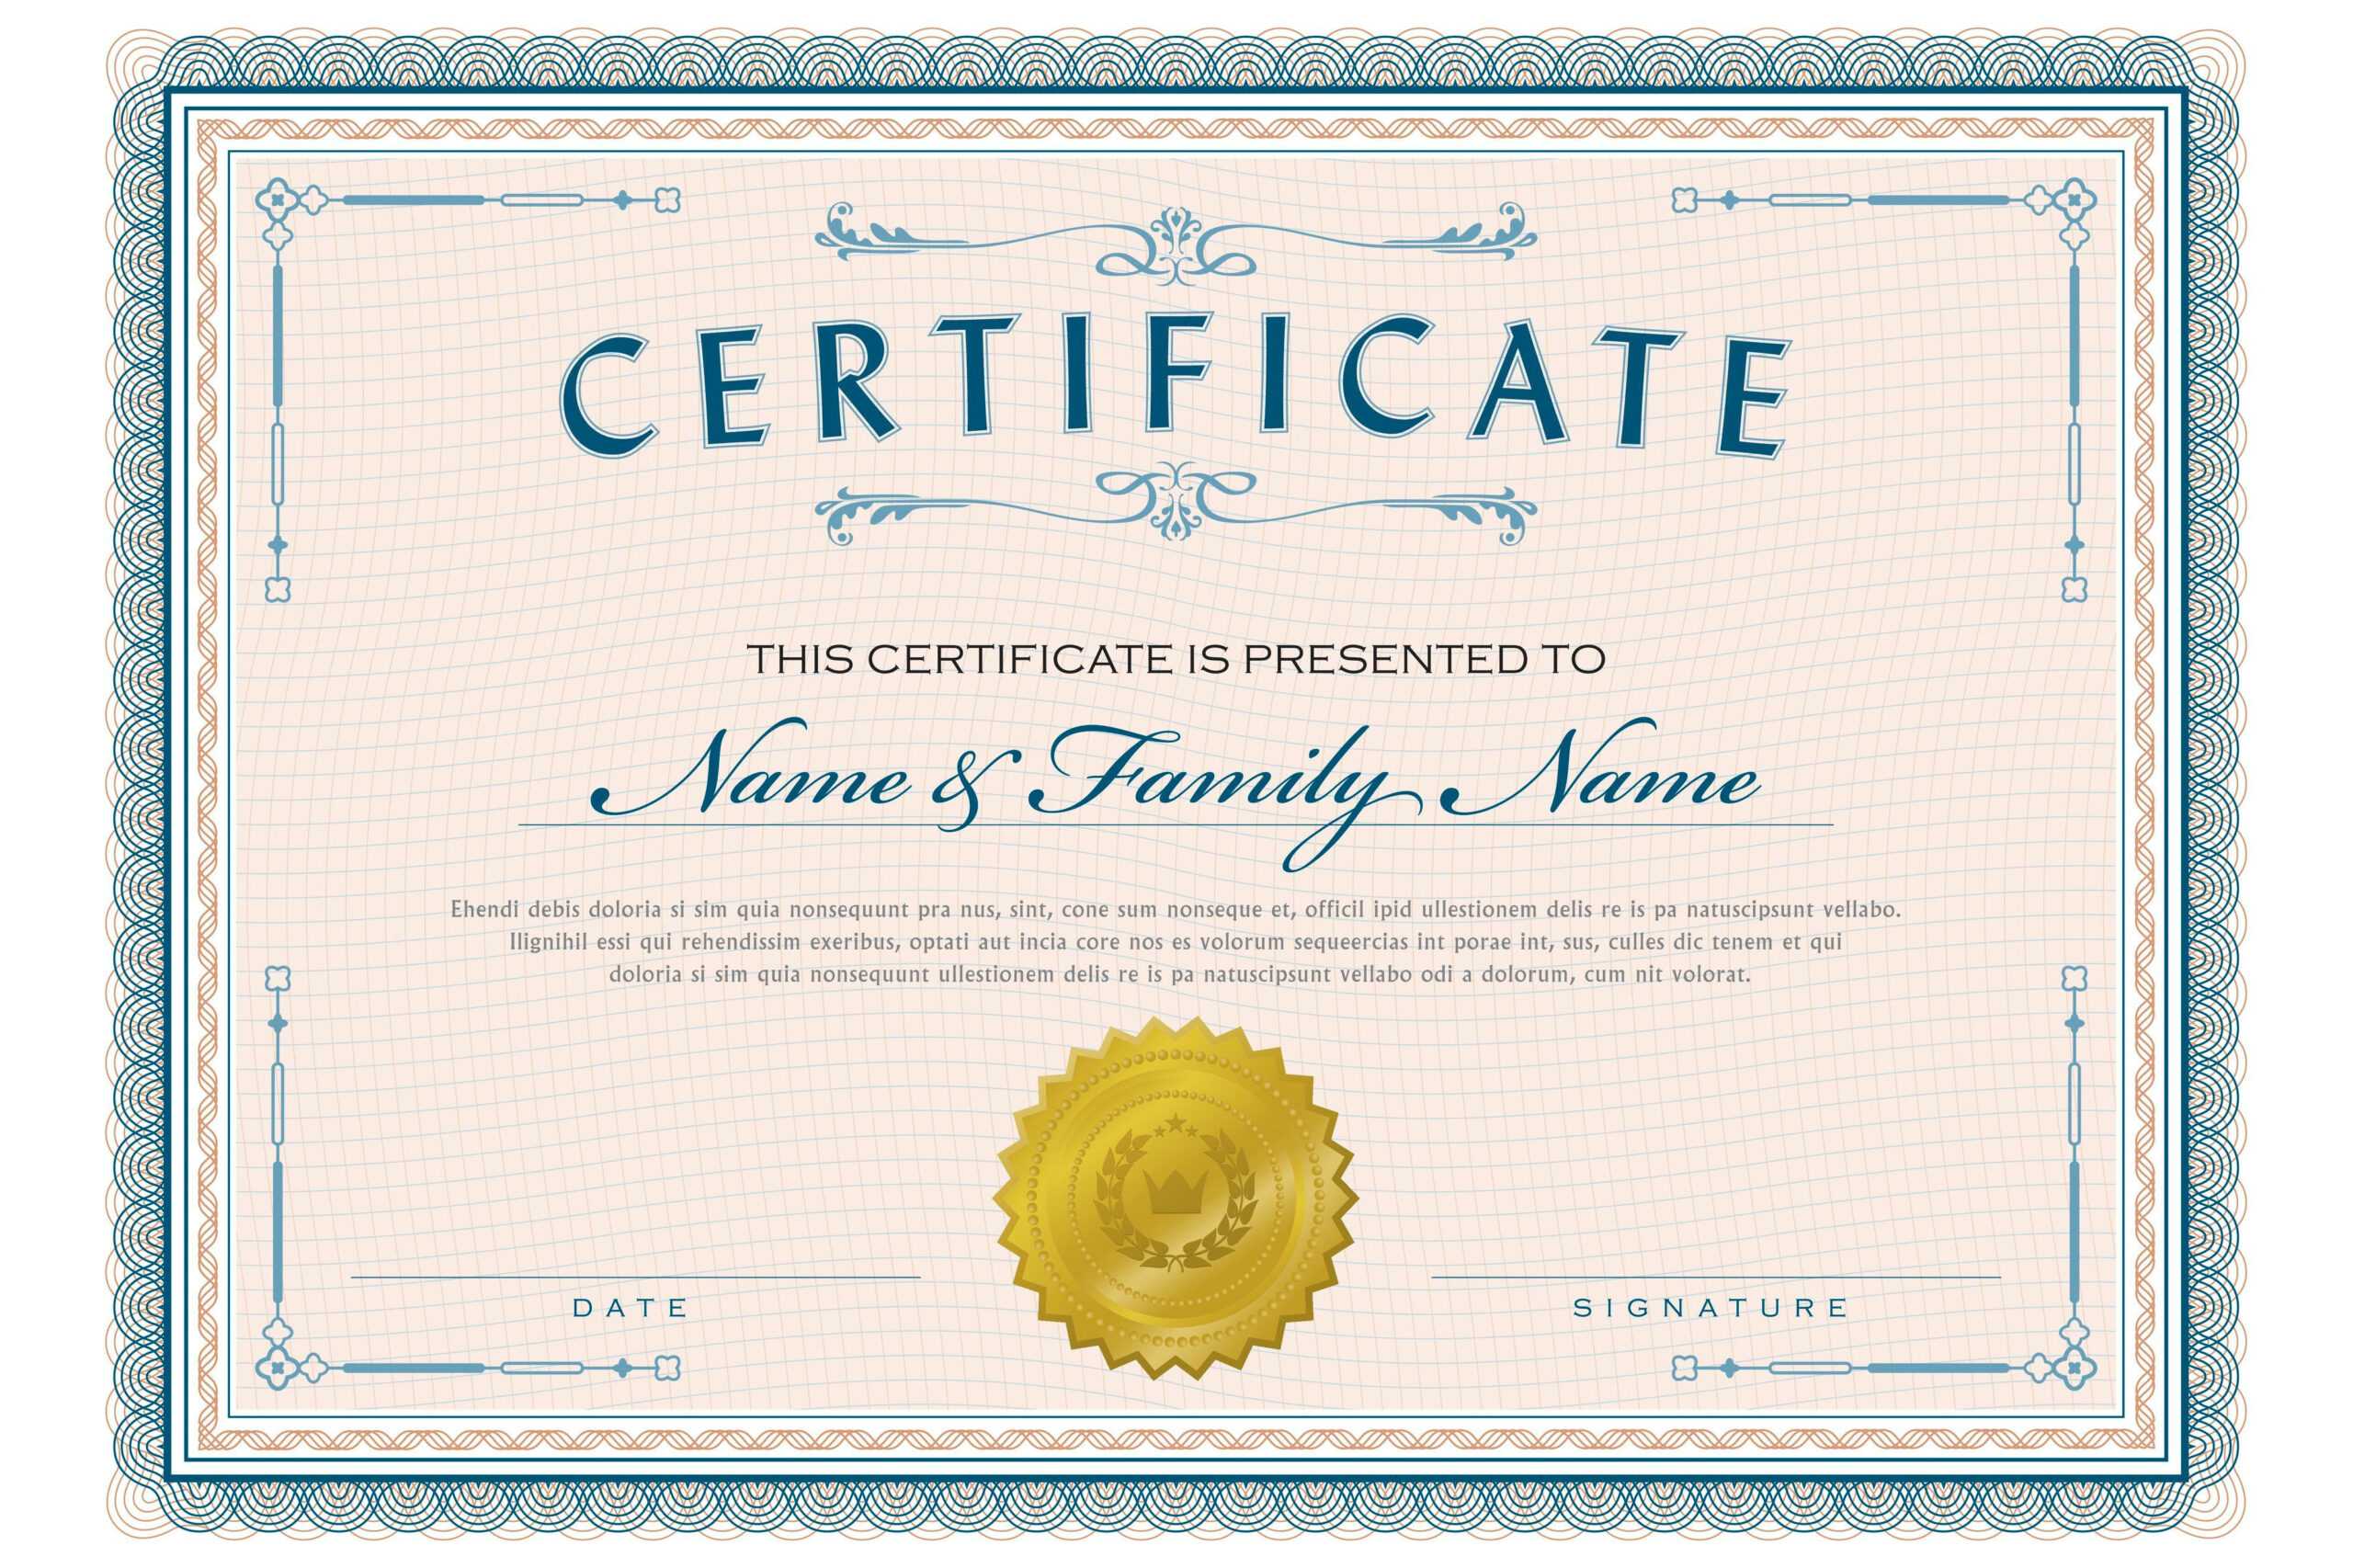 Necessary Parts Of An Award Certificate For Student Of The Year Award Certificate Templates